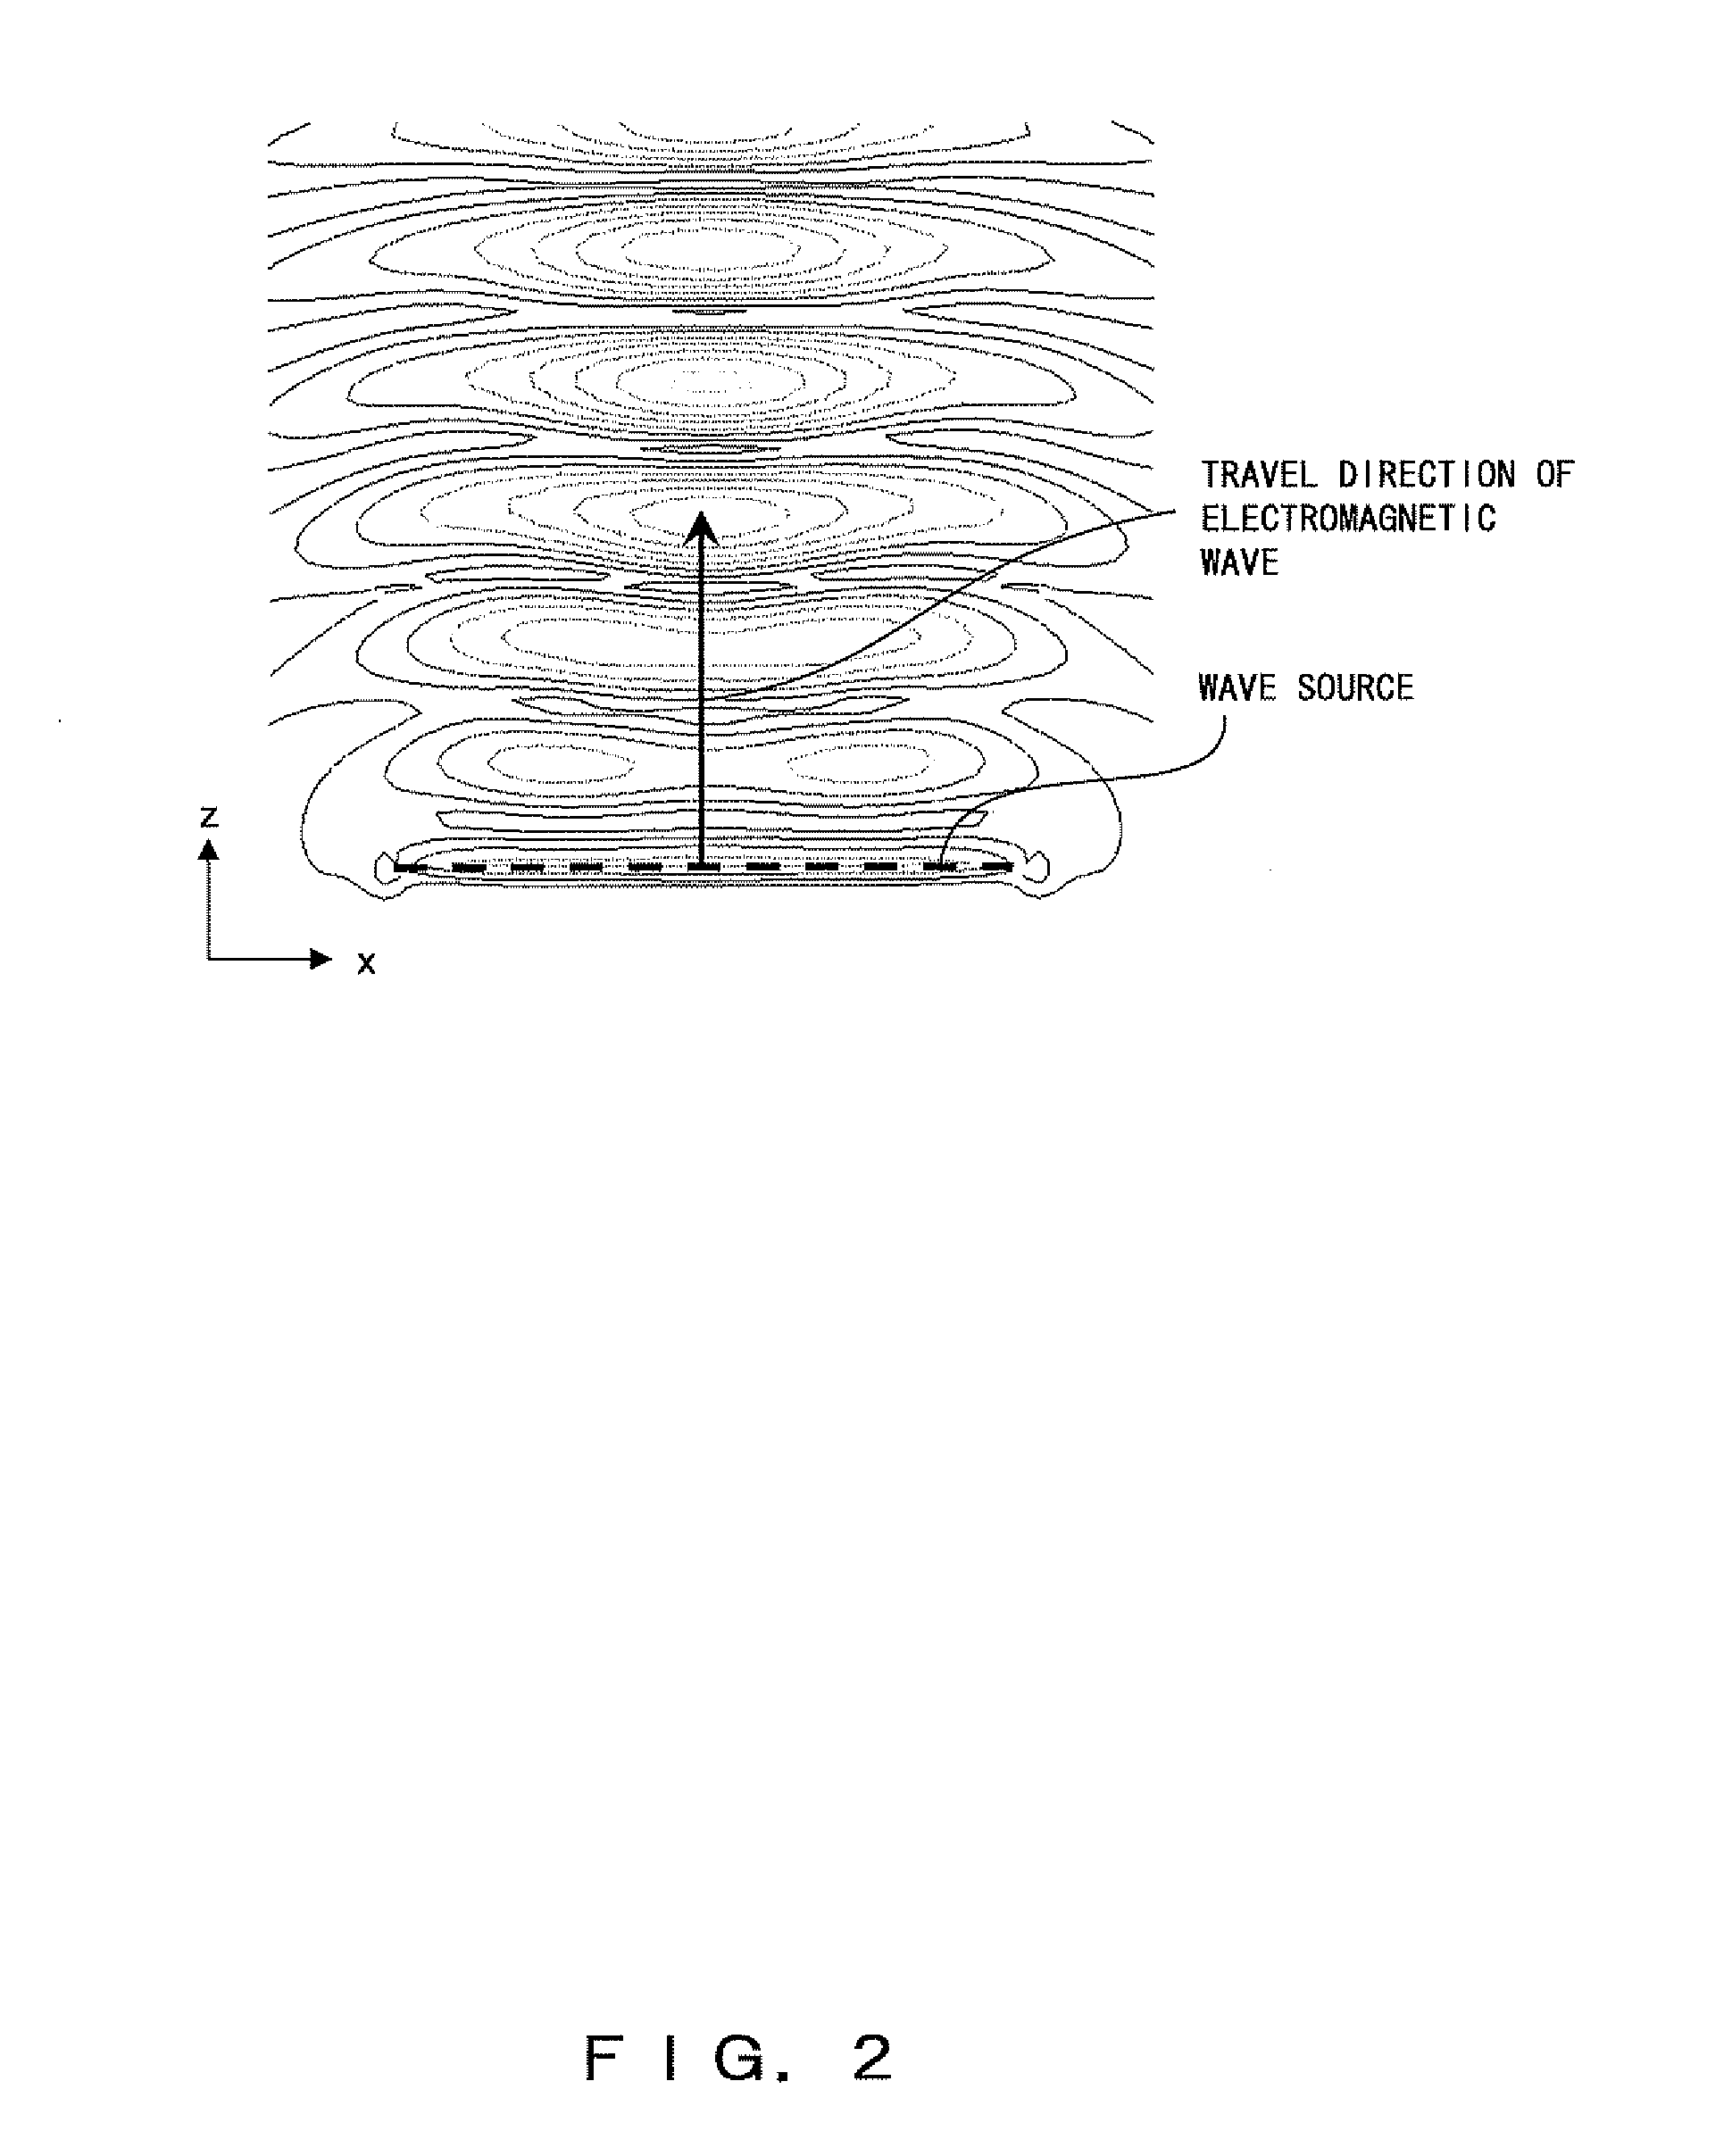 Electromagnetic field simulator and electromagnetic field simulating program product